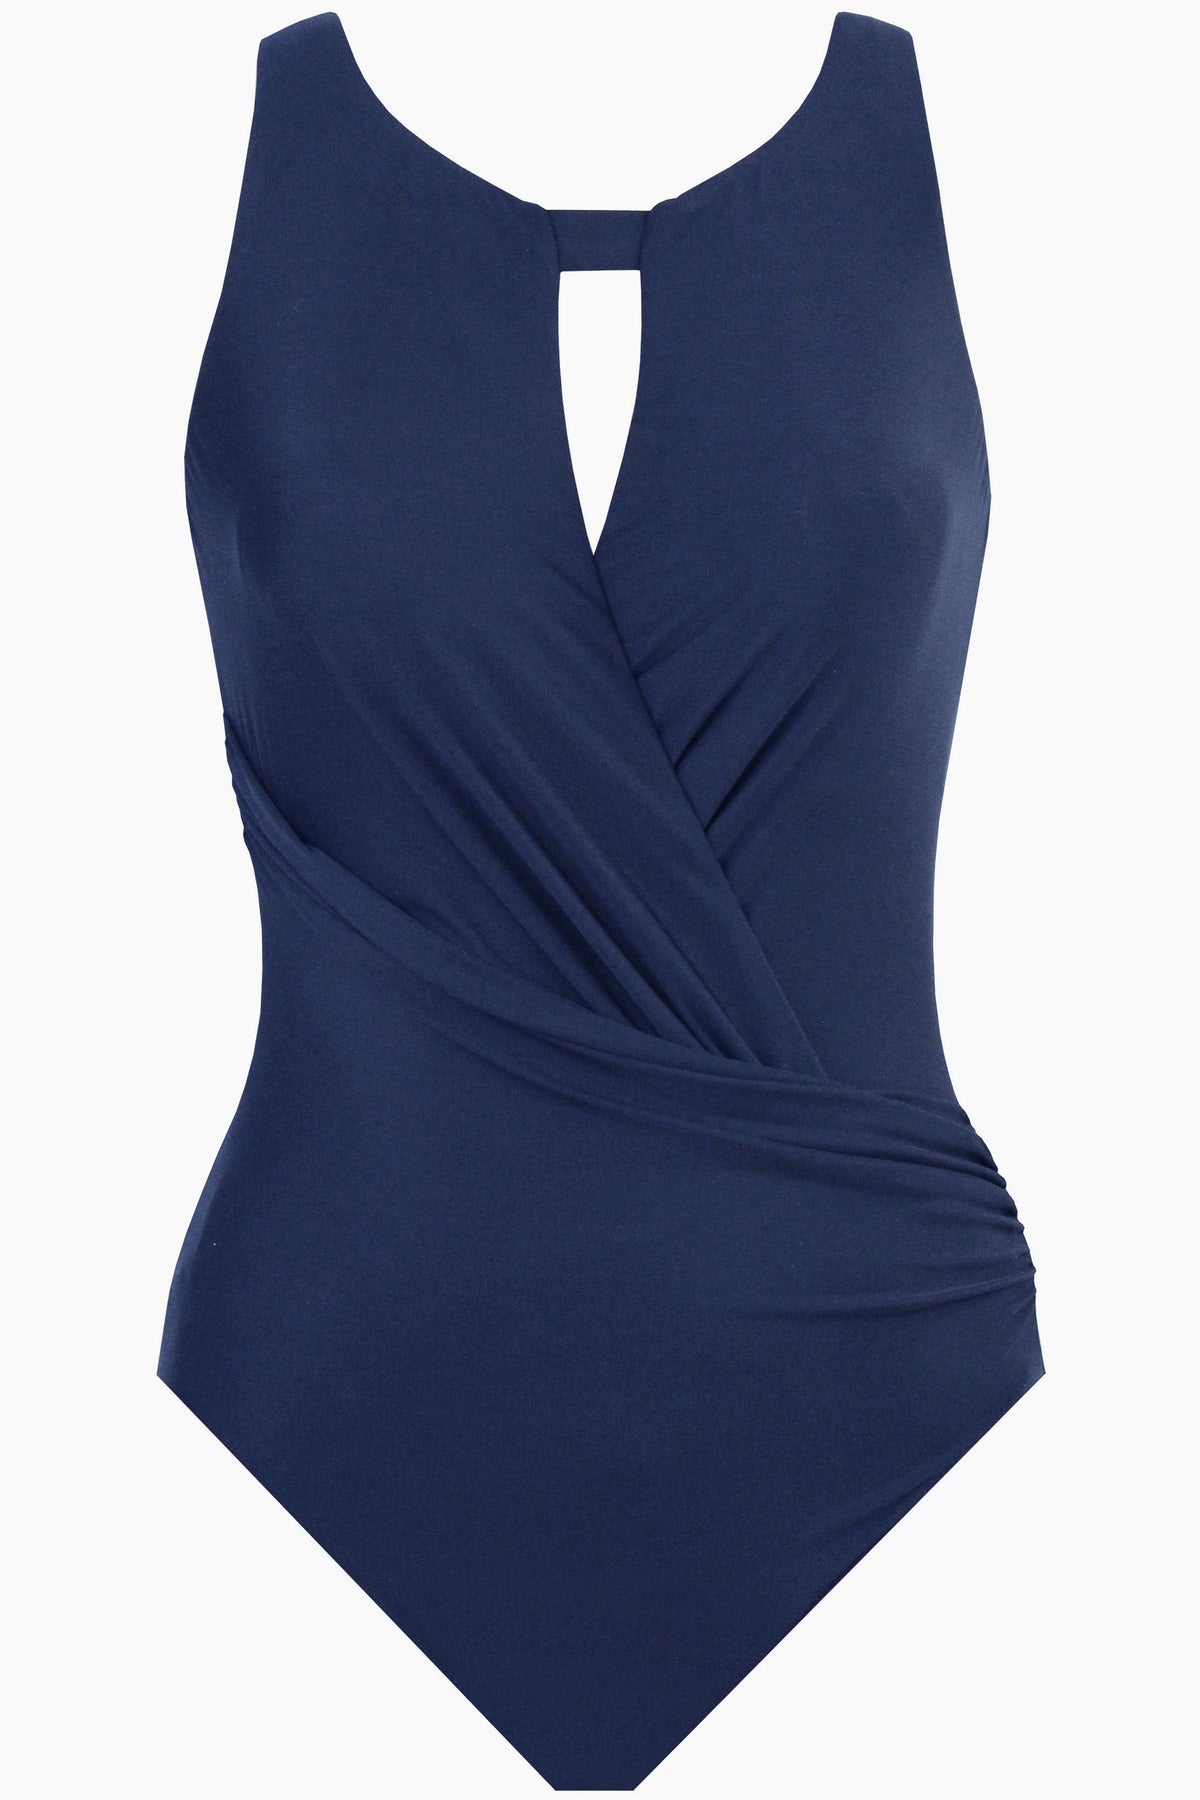 Miraclesuit Rock Solid Arden One Piece Swimsuit